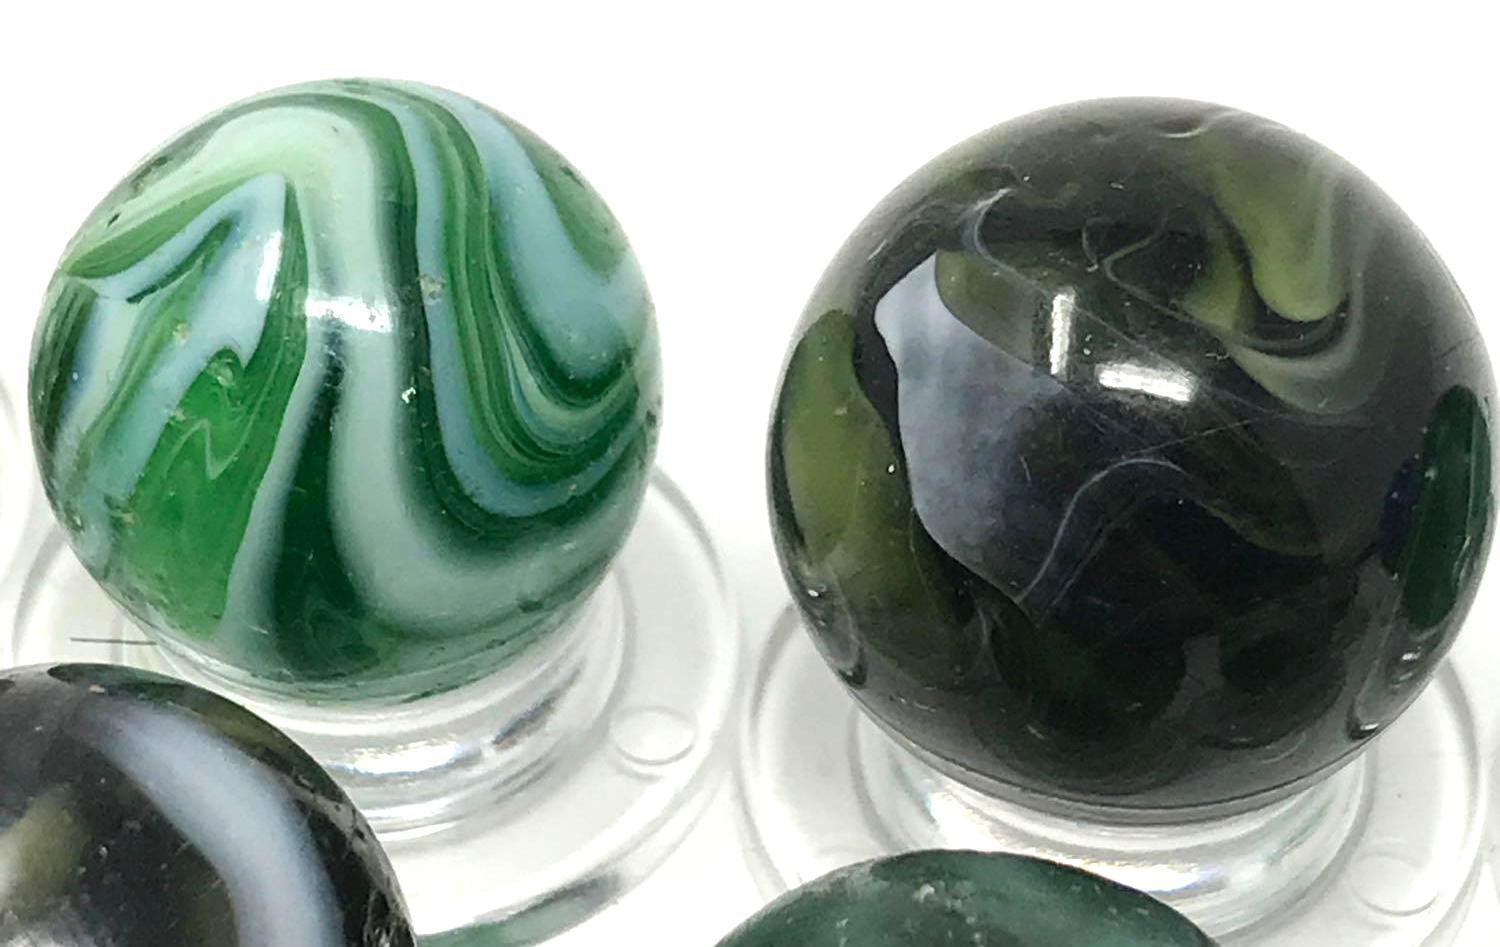 Vintage slag and glass marbles, Shooters.